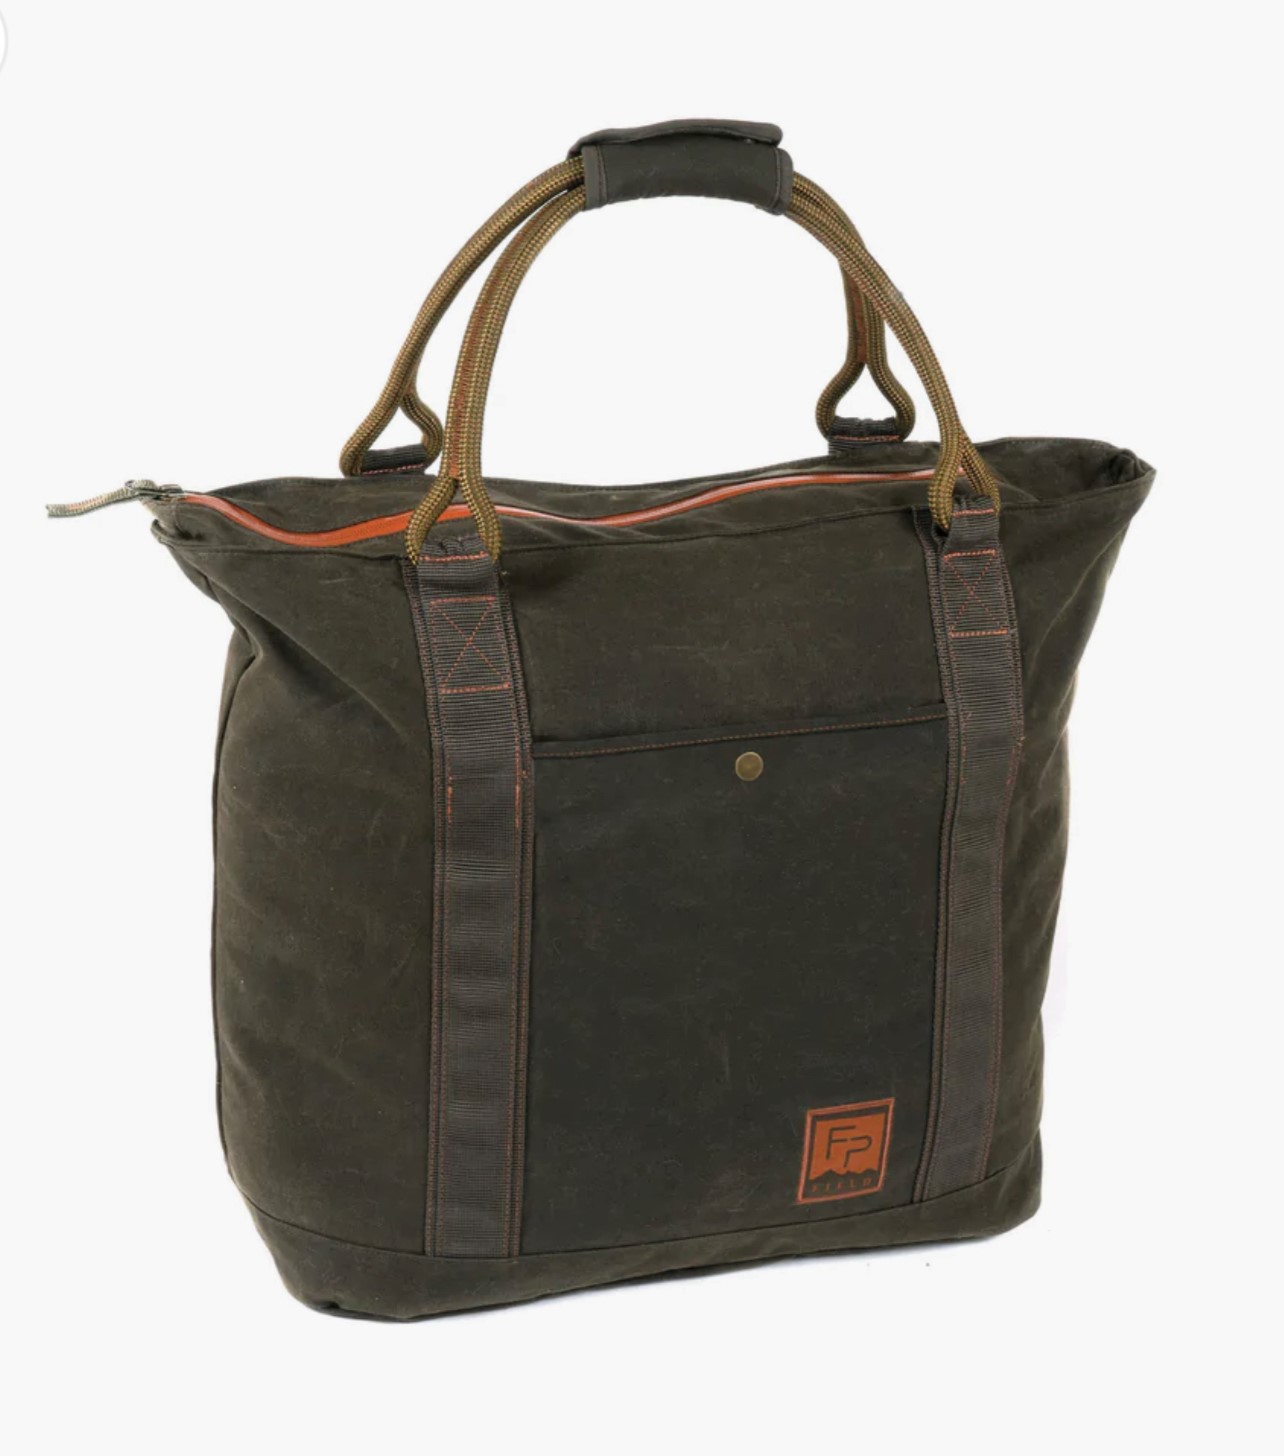 Fishpond Horse Thief Tote - Peat Moss